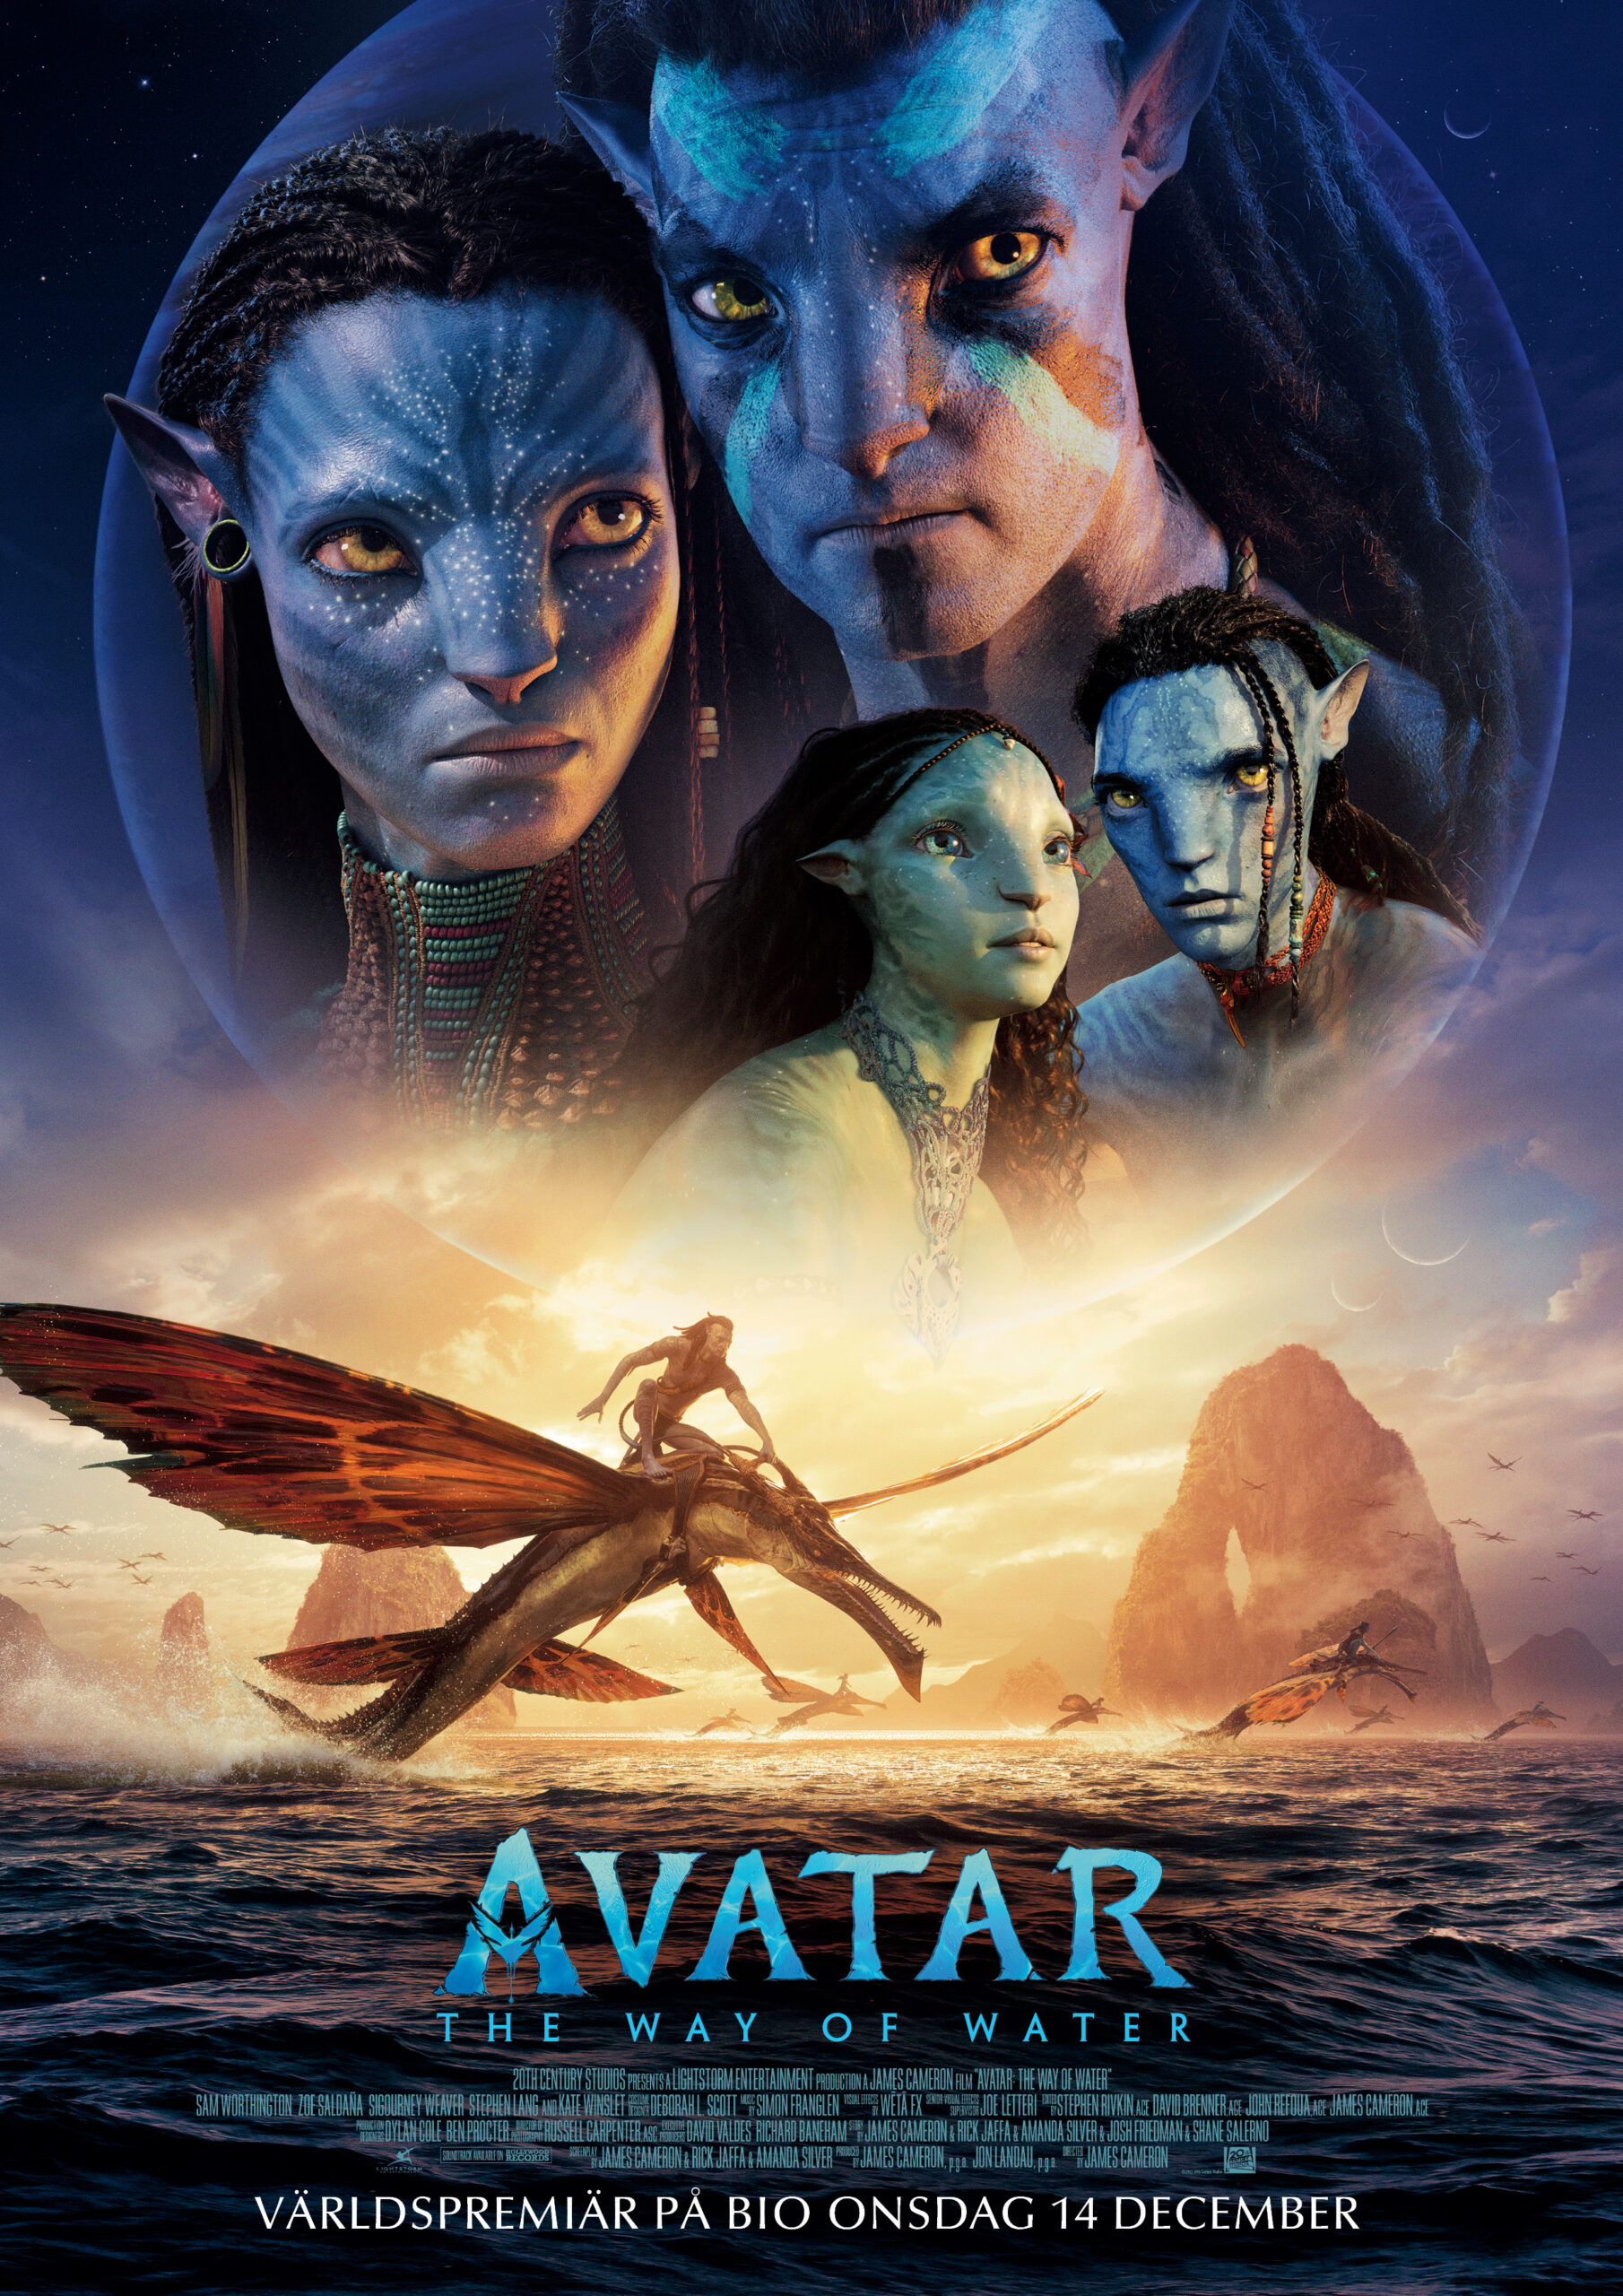 Avatar – The way of water